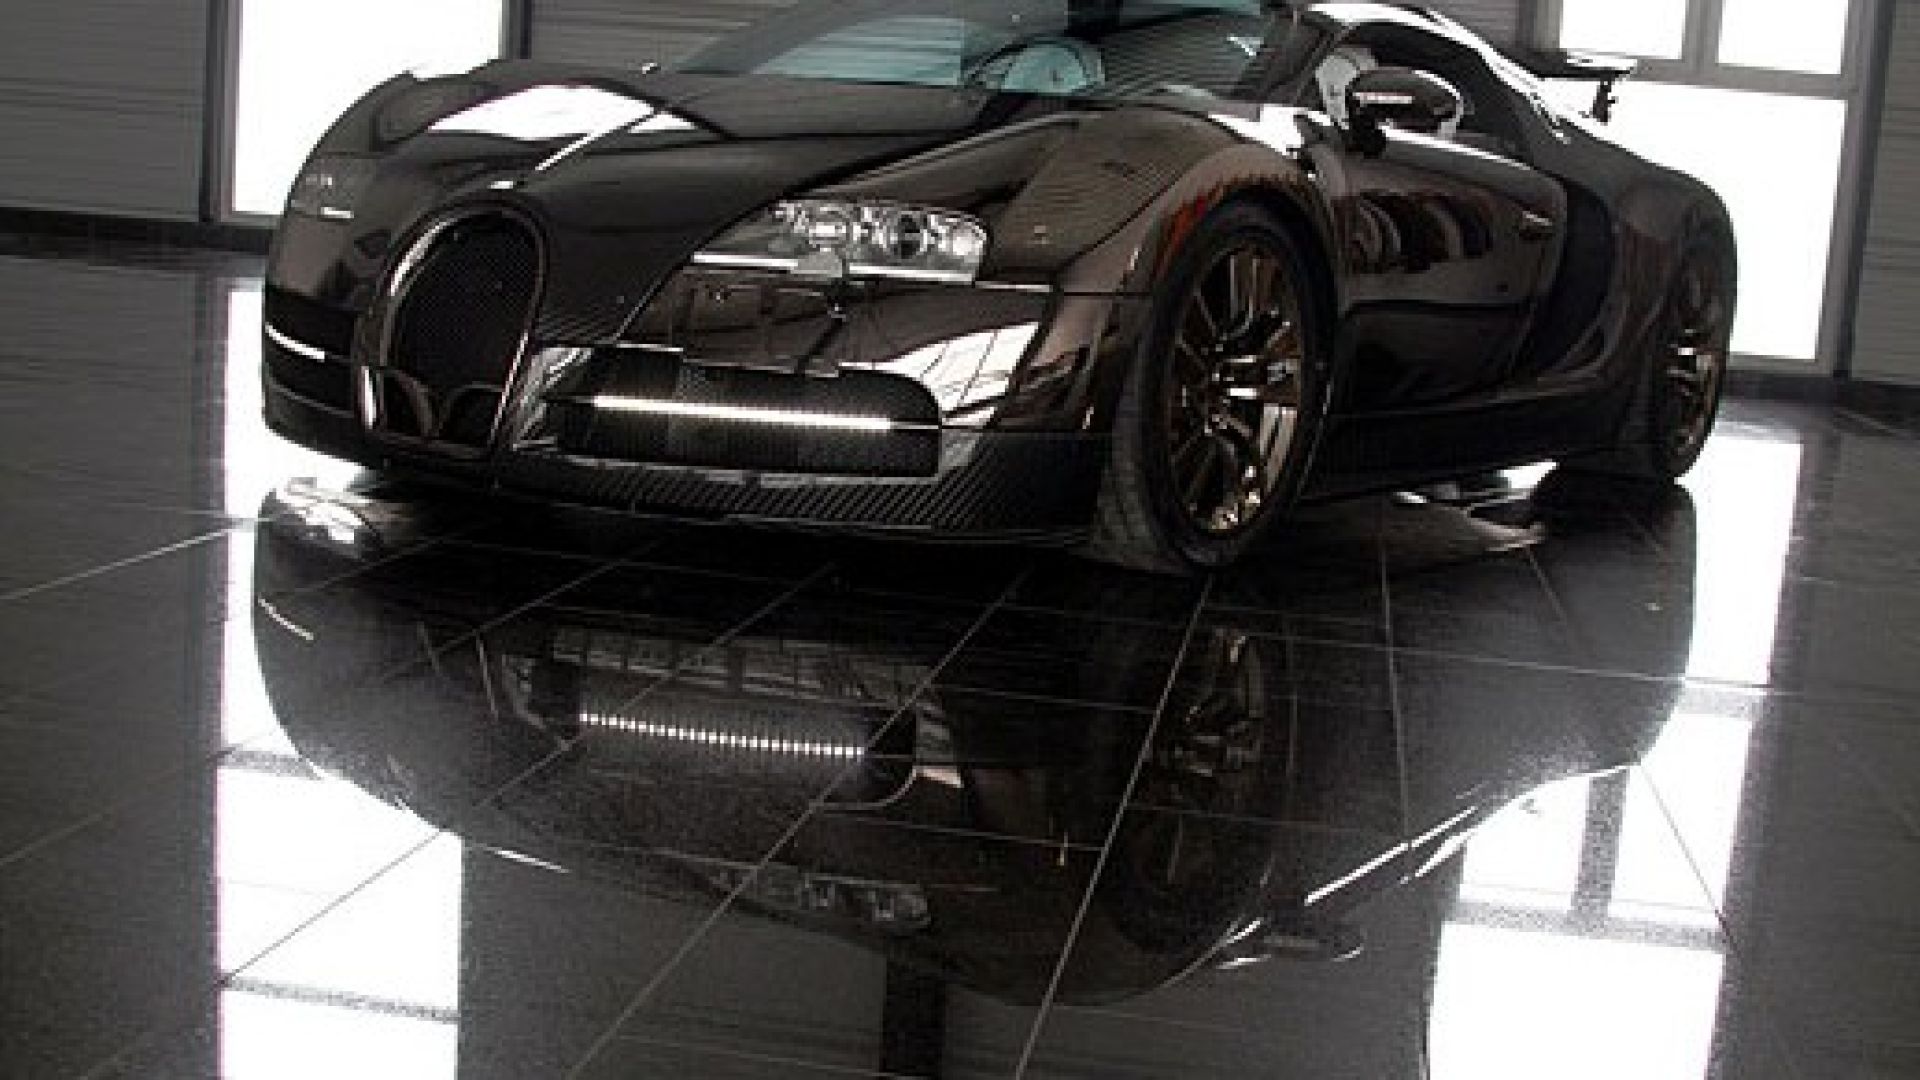 How much does a bugatti cost